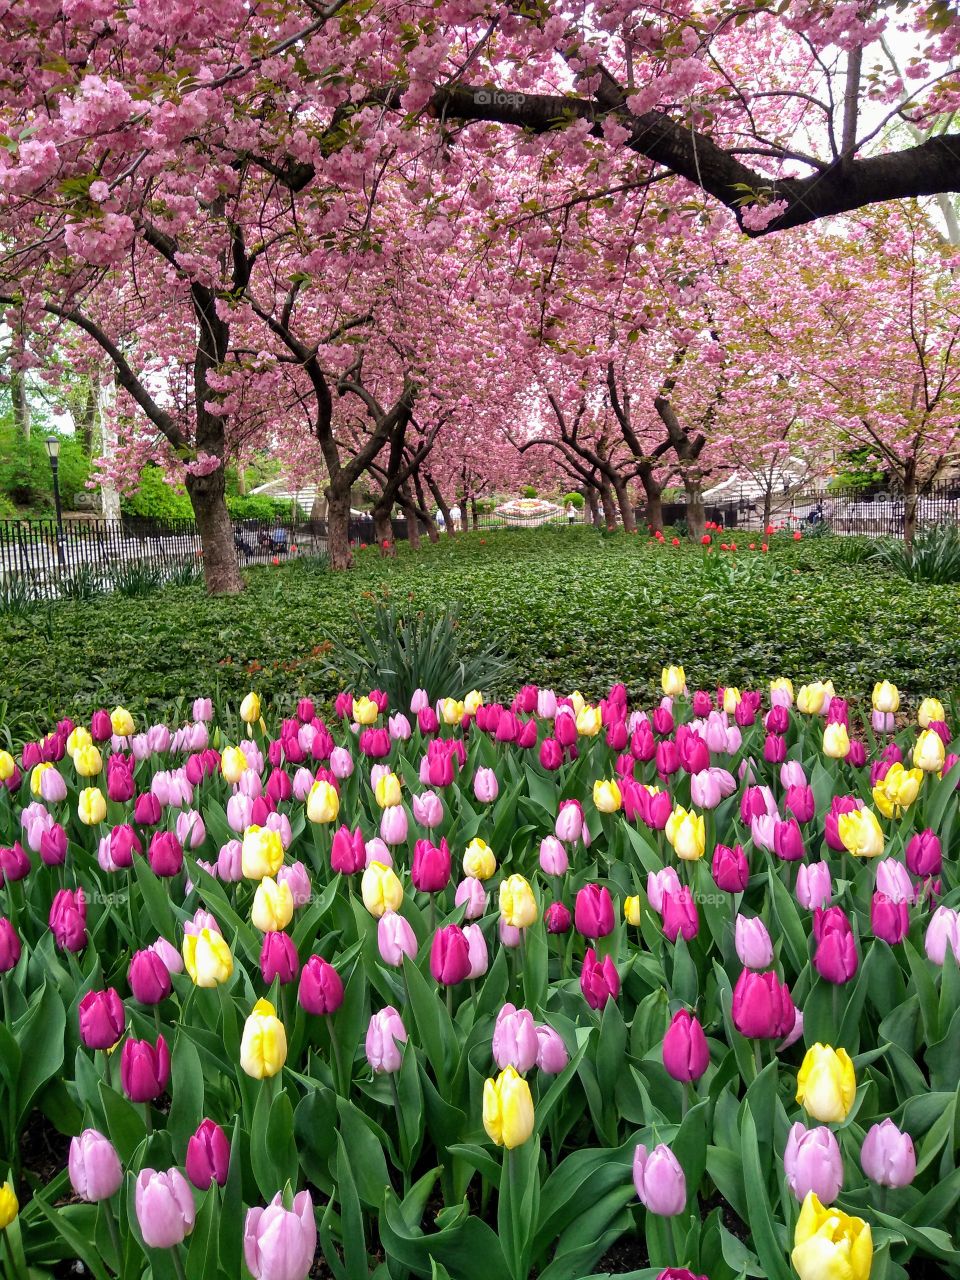 NYC Park Flowering Trees and Tulips